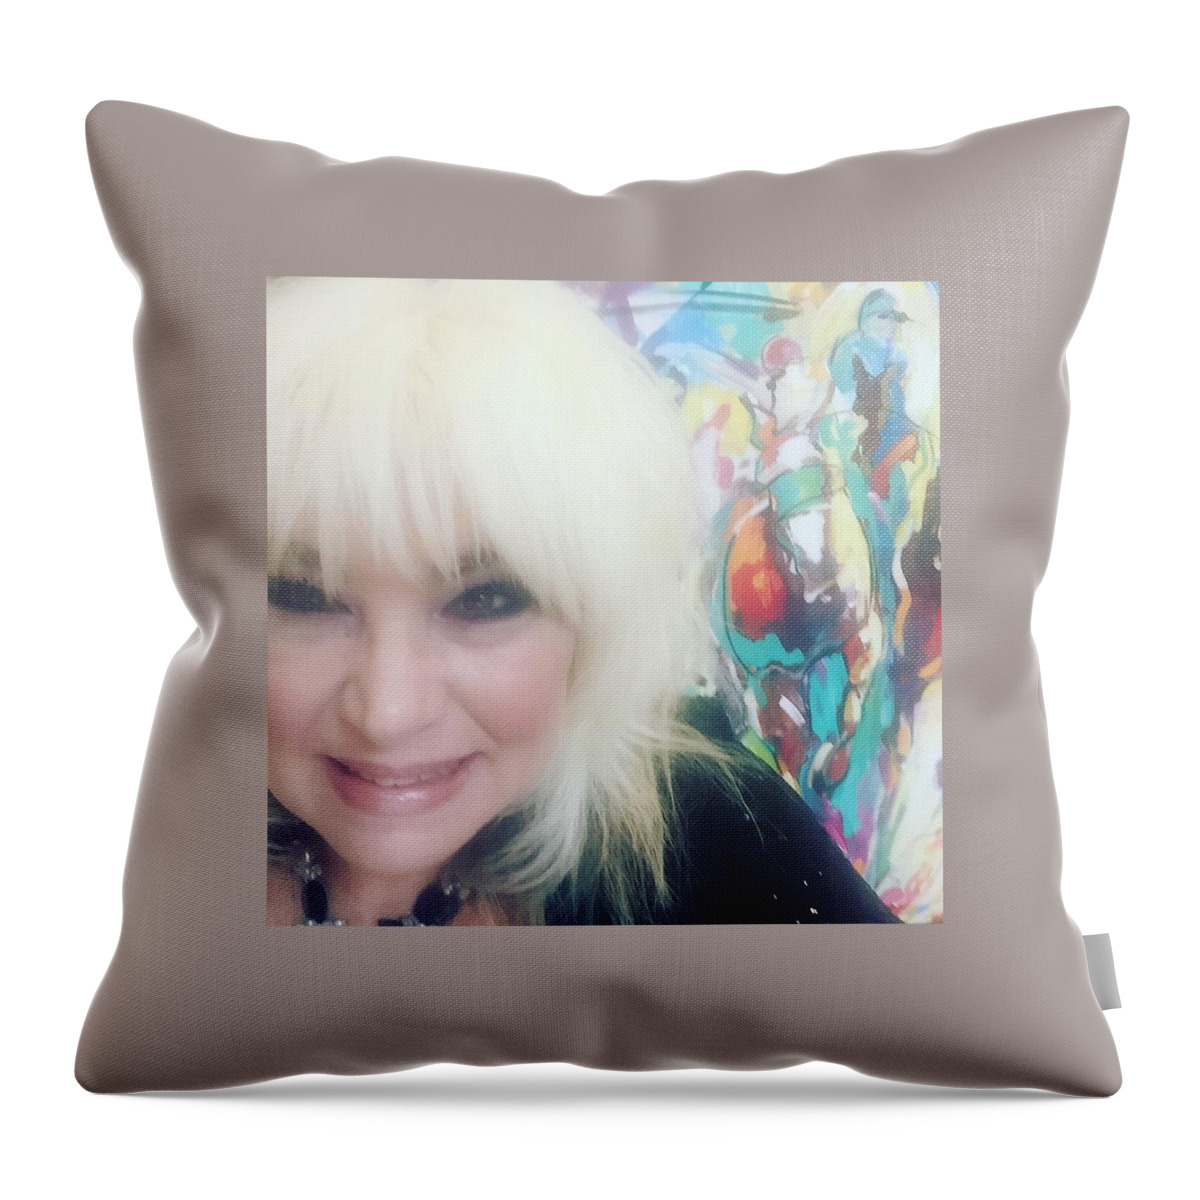  Throw Pillow featuring the painting Del Mar Artist by Heather Roddy